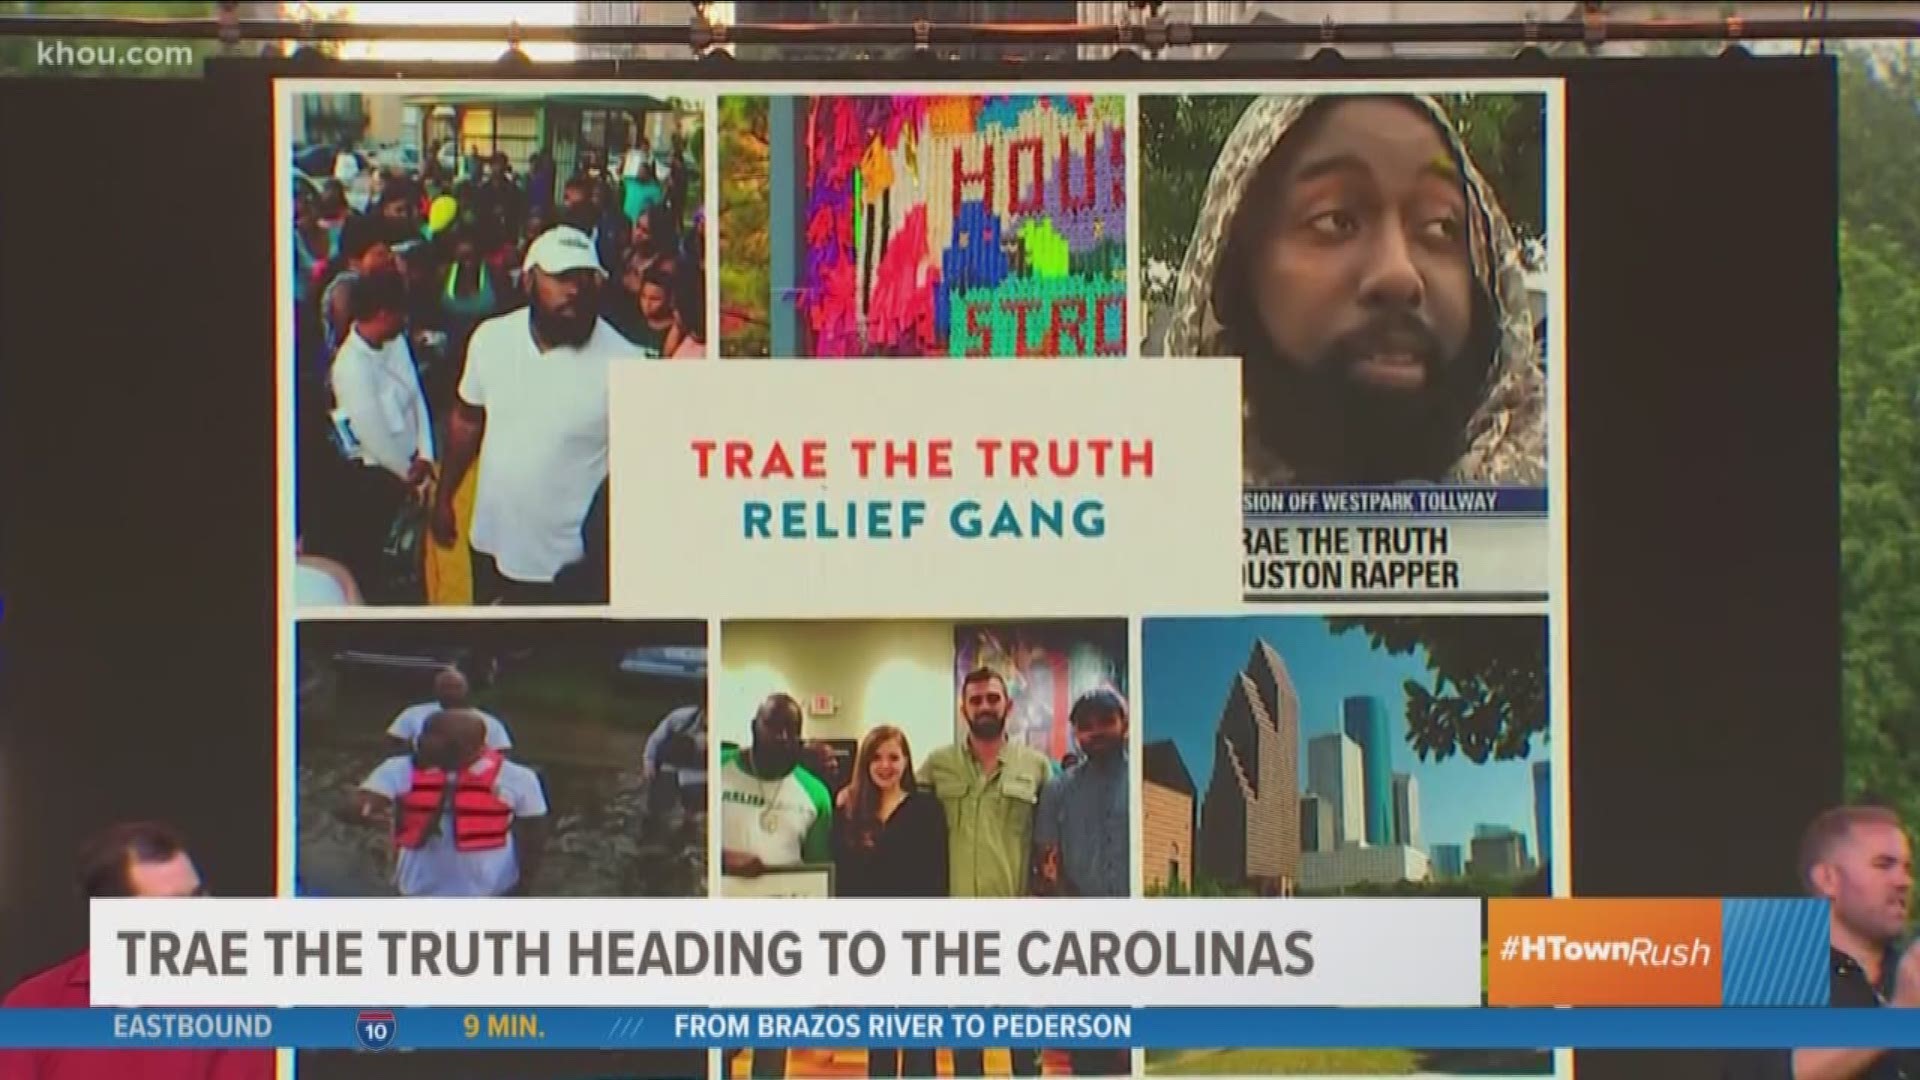 Trae the Truth is driving to the Carolinas along with his Relief Gang group to help folks in the wake of Hurricane Florence.